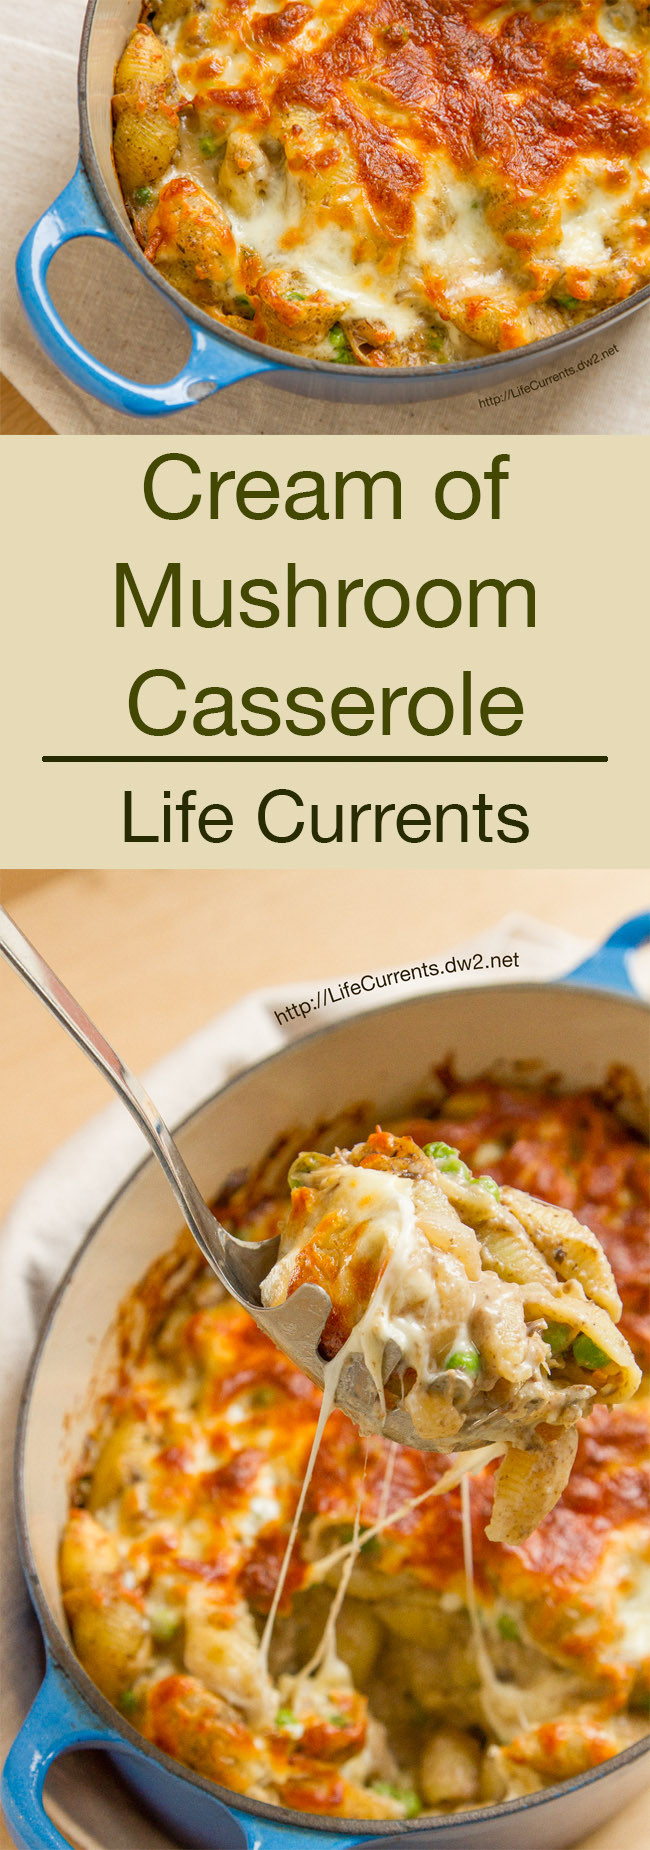 Mixed Vegetable Casserole With Cream Of Mushroom Soup
 Cream of Mushroom Casserole Life Currents